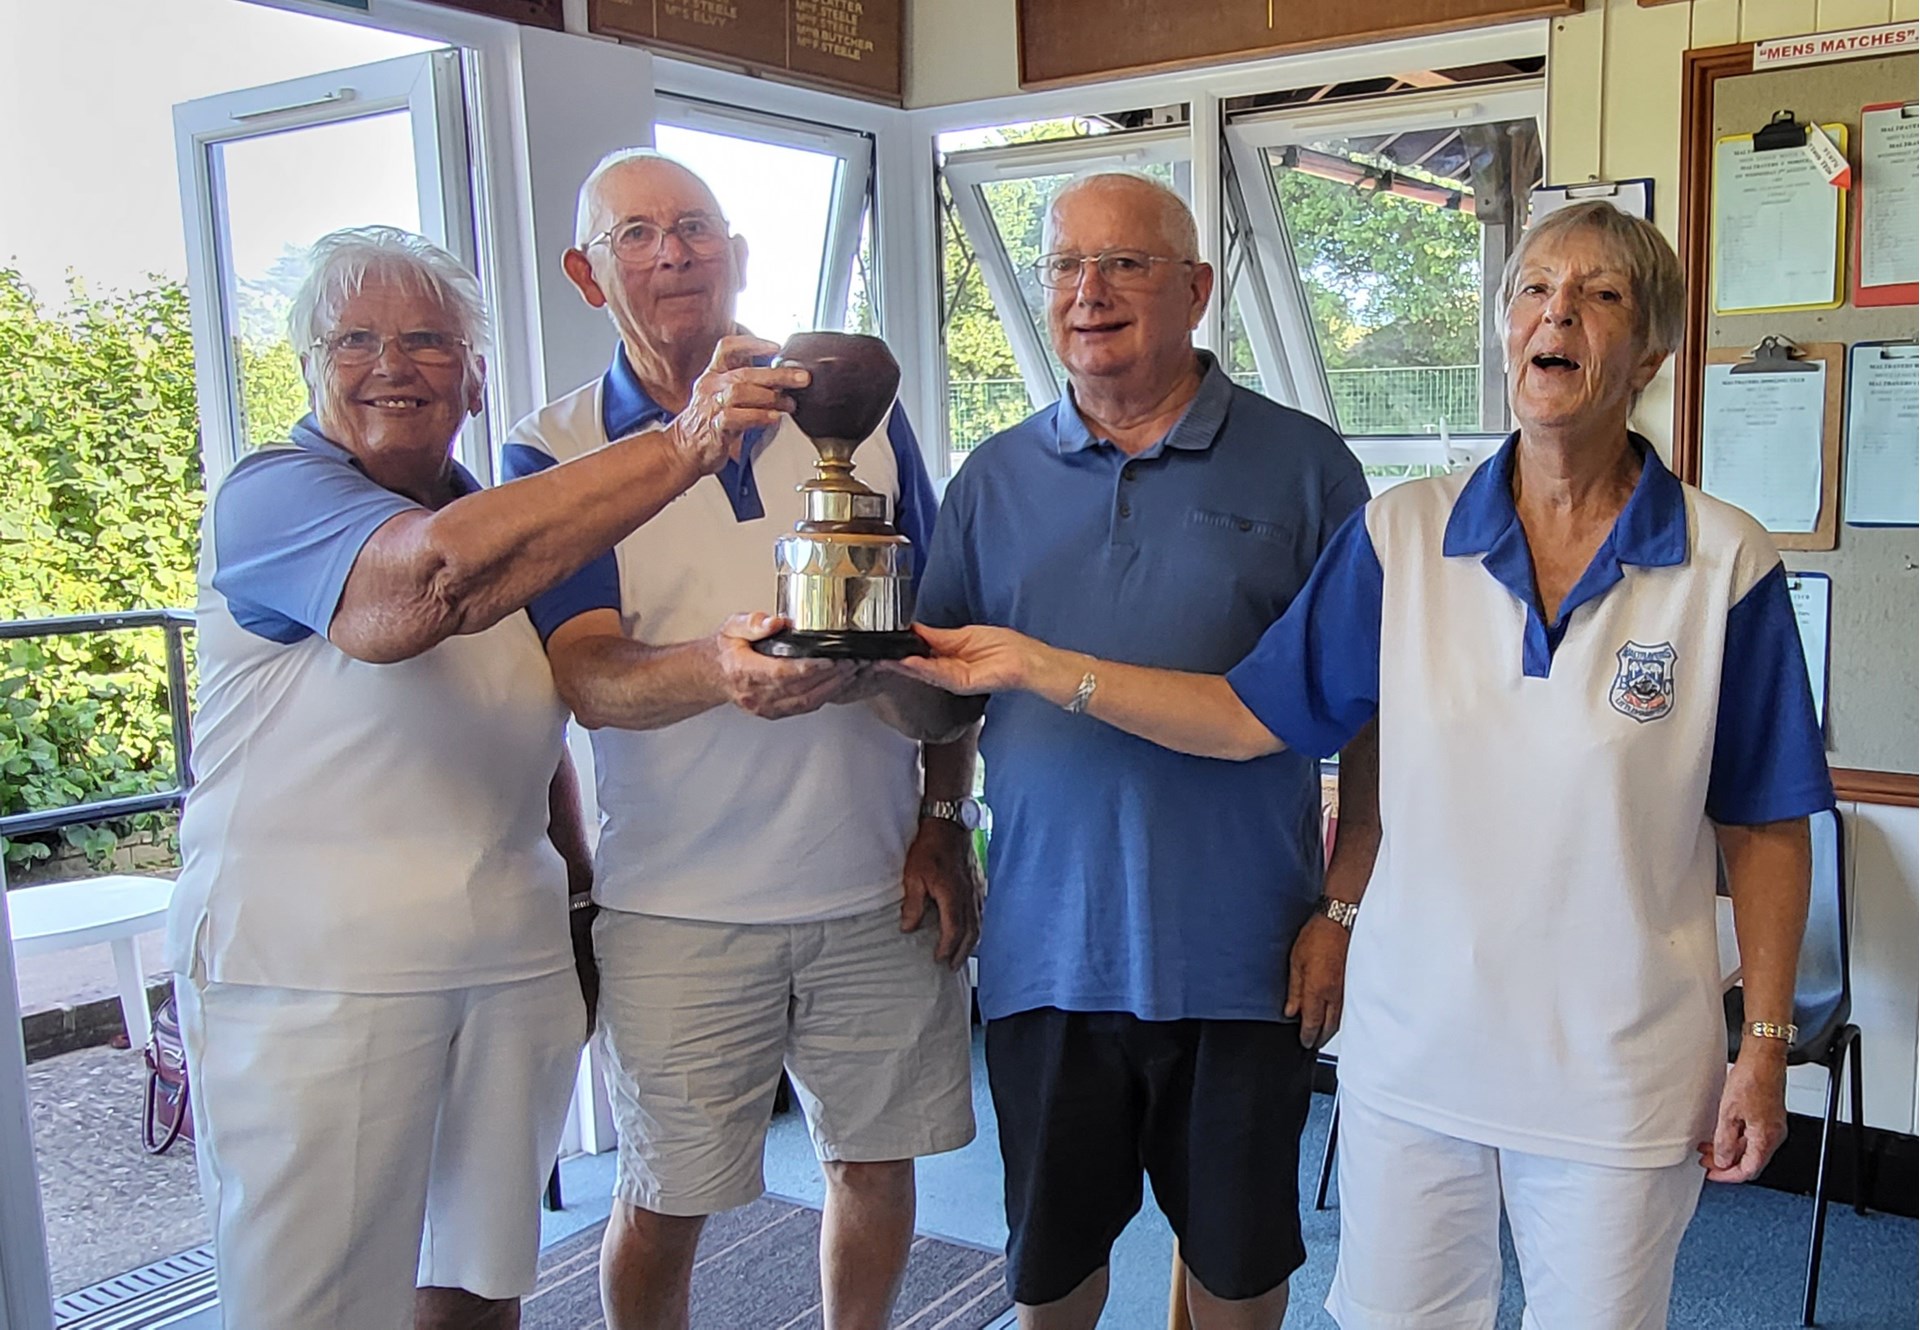 Janet Denyer, Arthur Denyer and April Mitchell  being presented with the Cameron Trophy 2022  by Dave Dyball